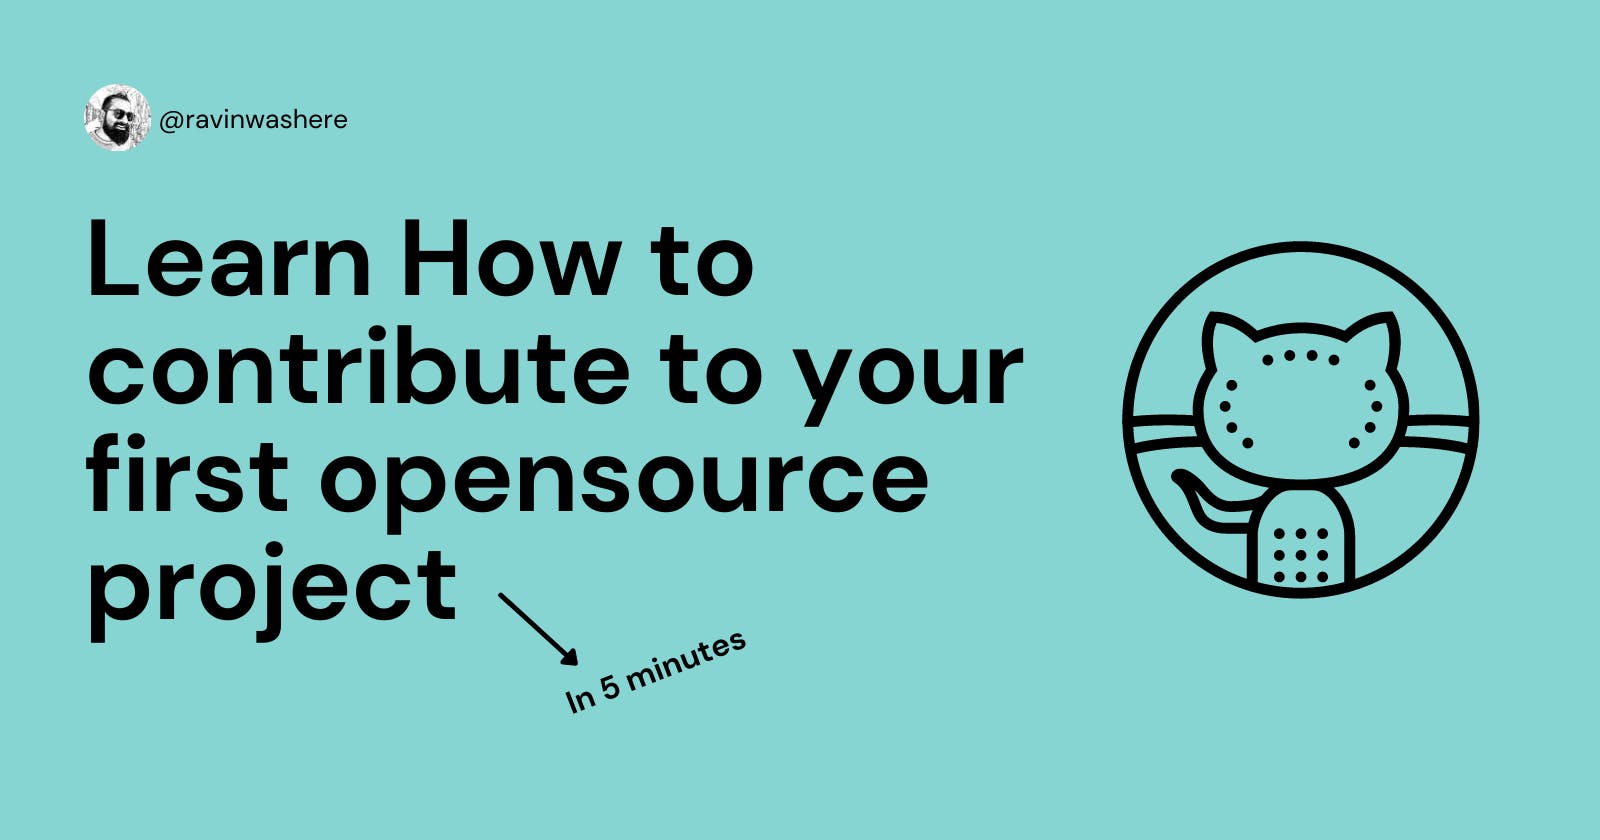 Learn How To Contribute To Your First Opensource Project In 5 Minutes